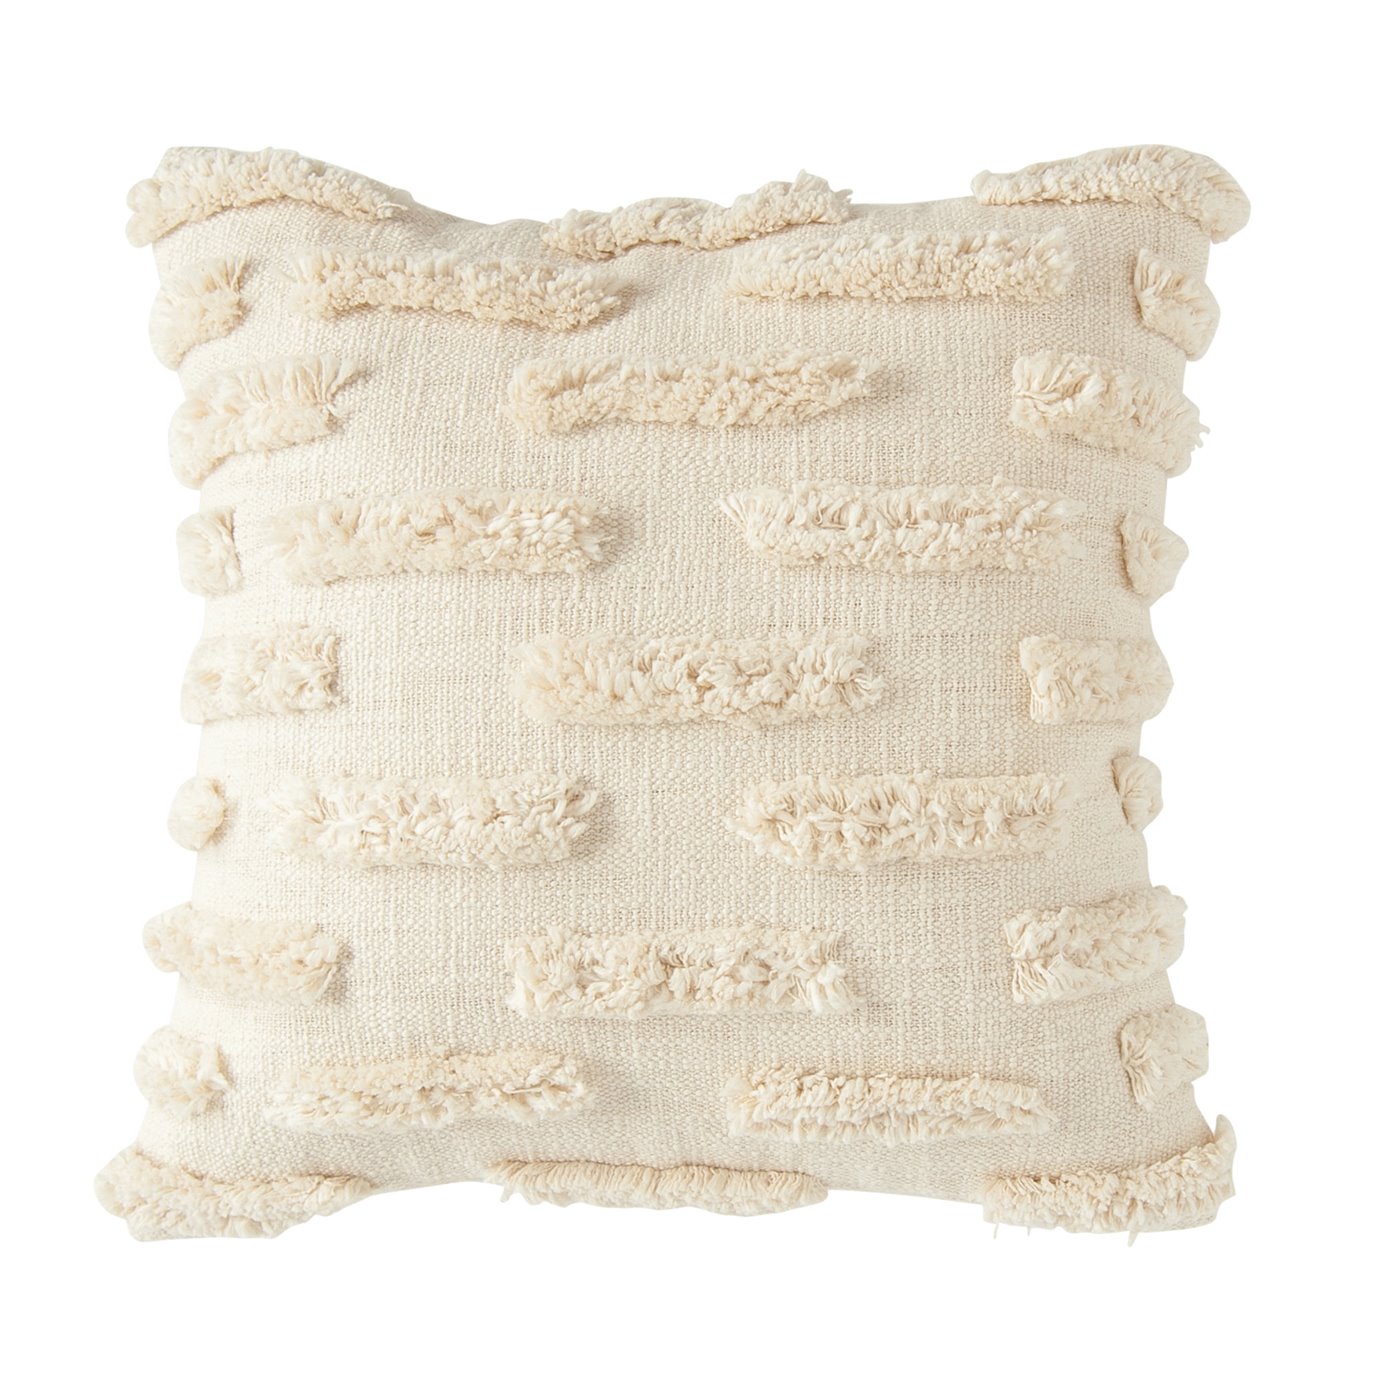 White Cotton Embroidered Pillow with Lines of Decorative Fringe